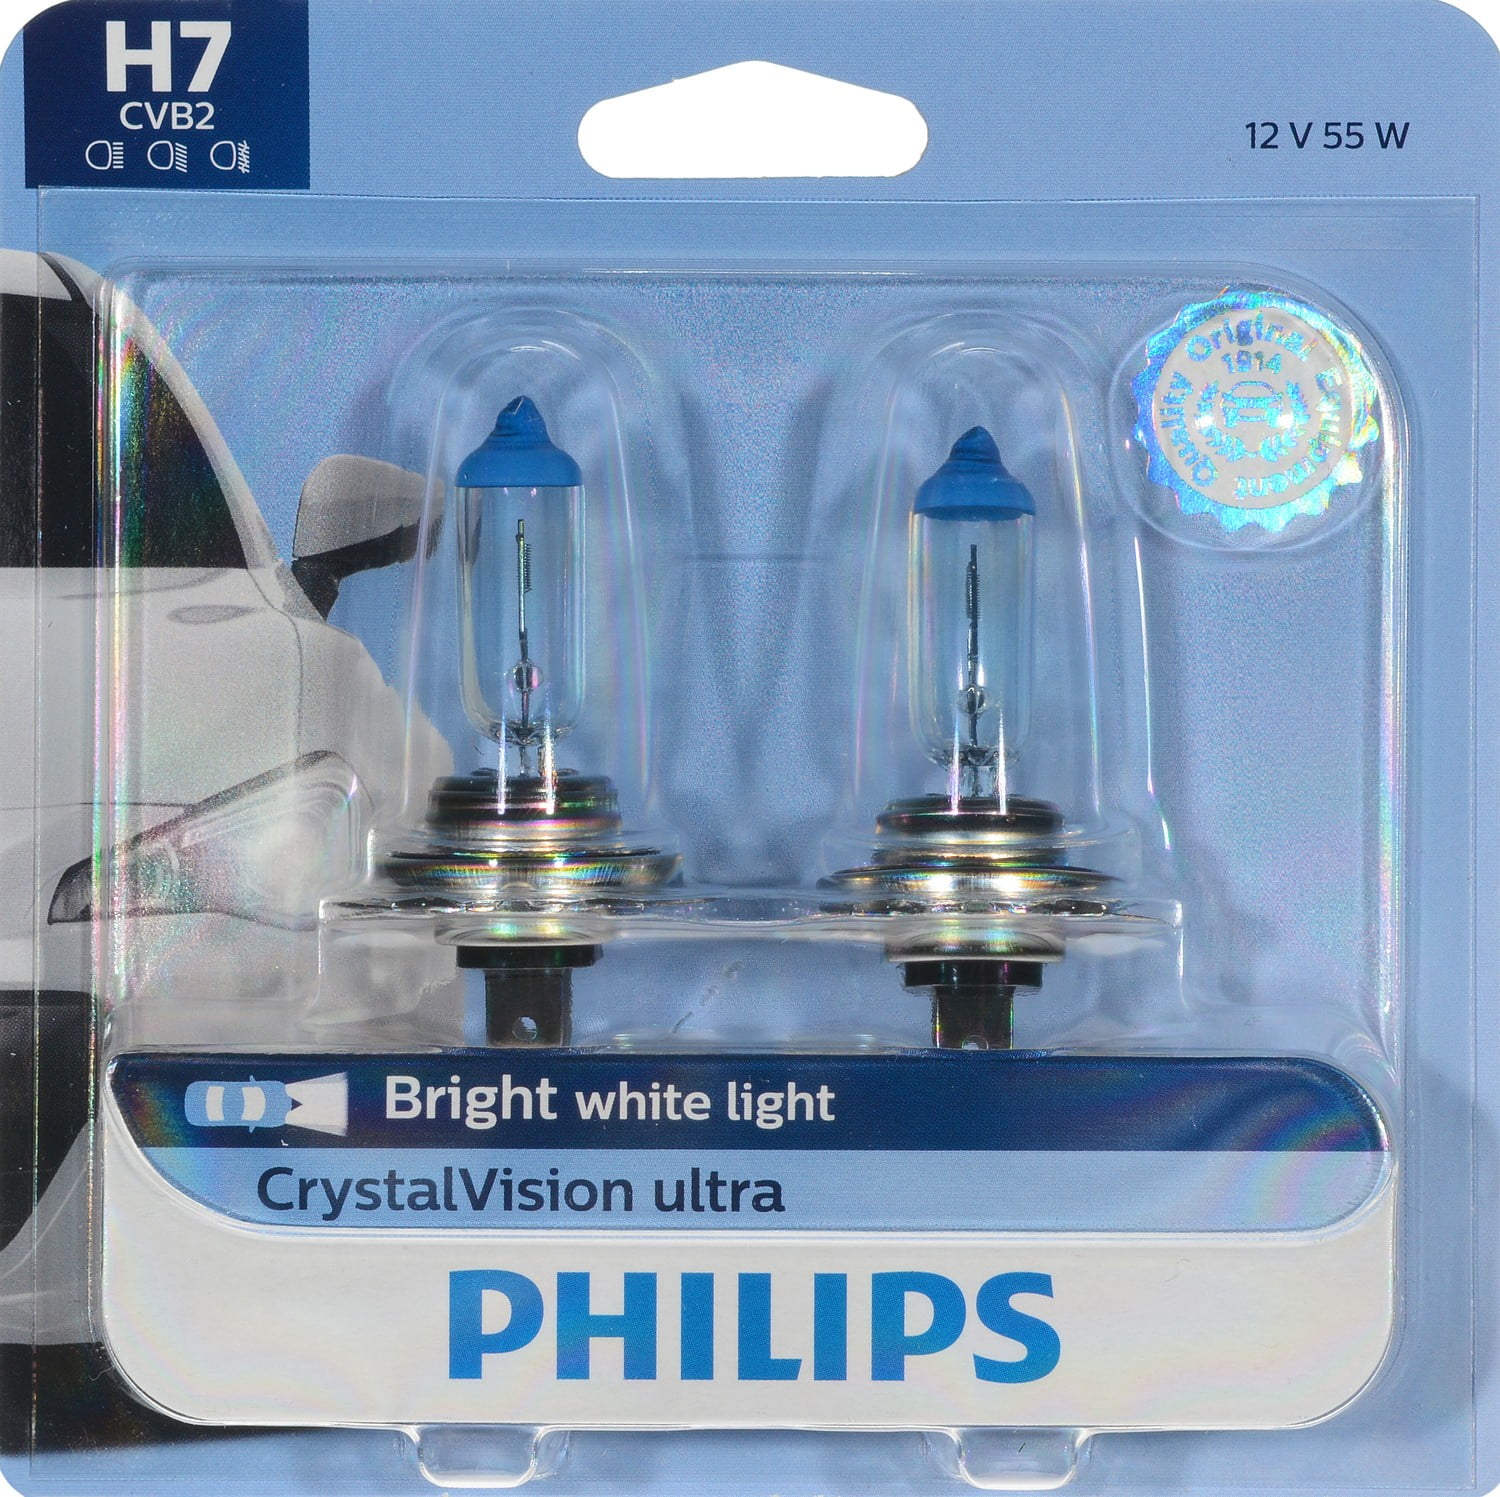 Philips WhiteVision Ultra H7 (Twin)